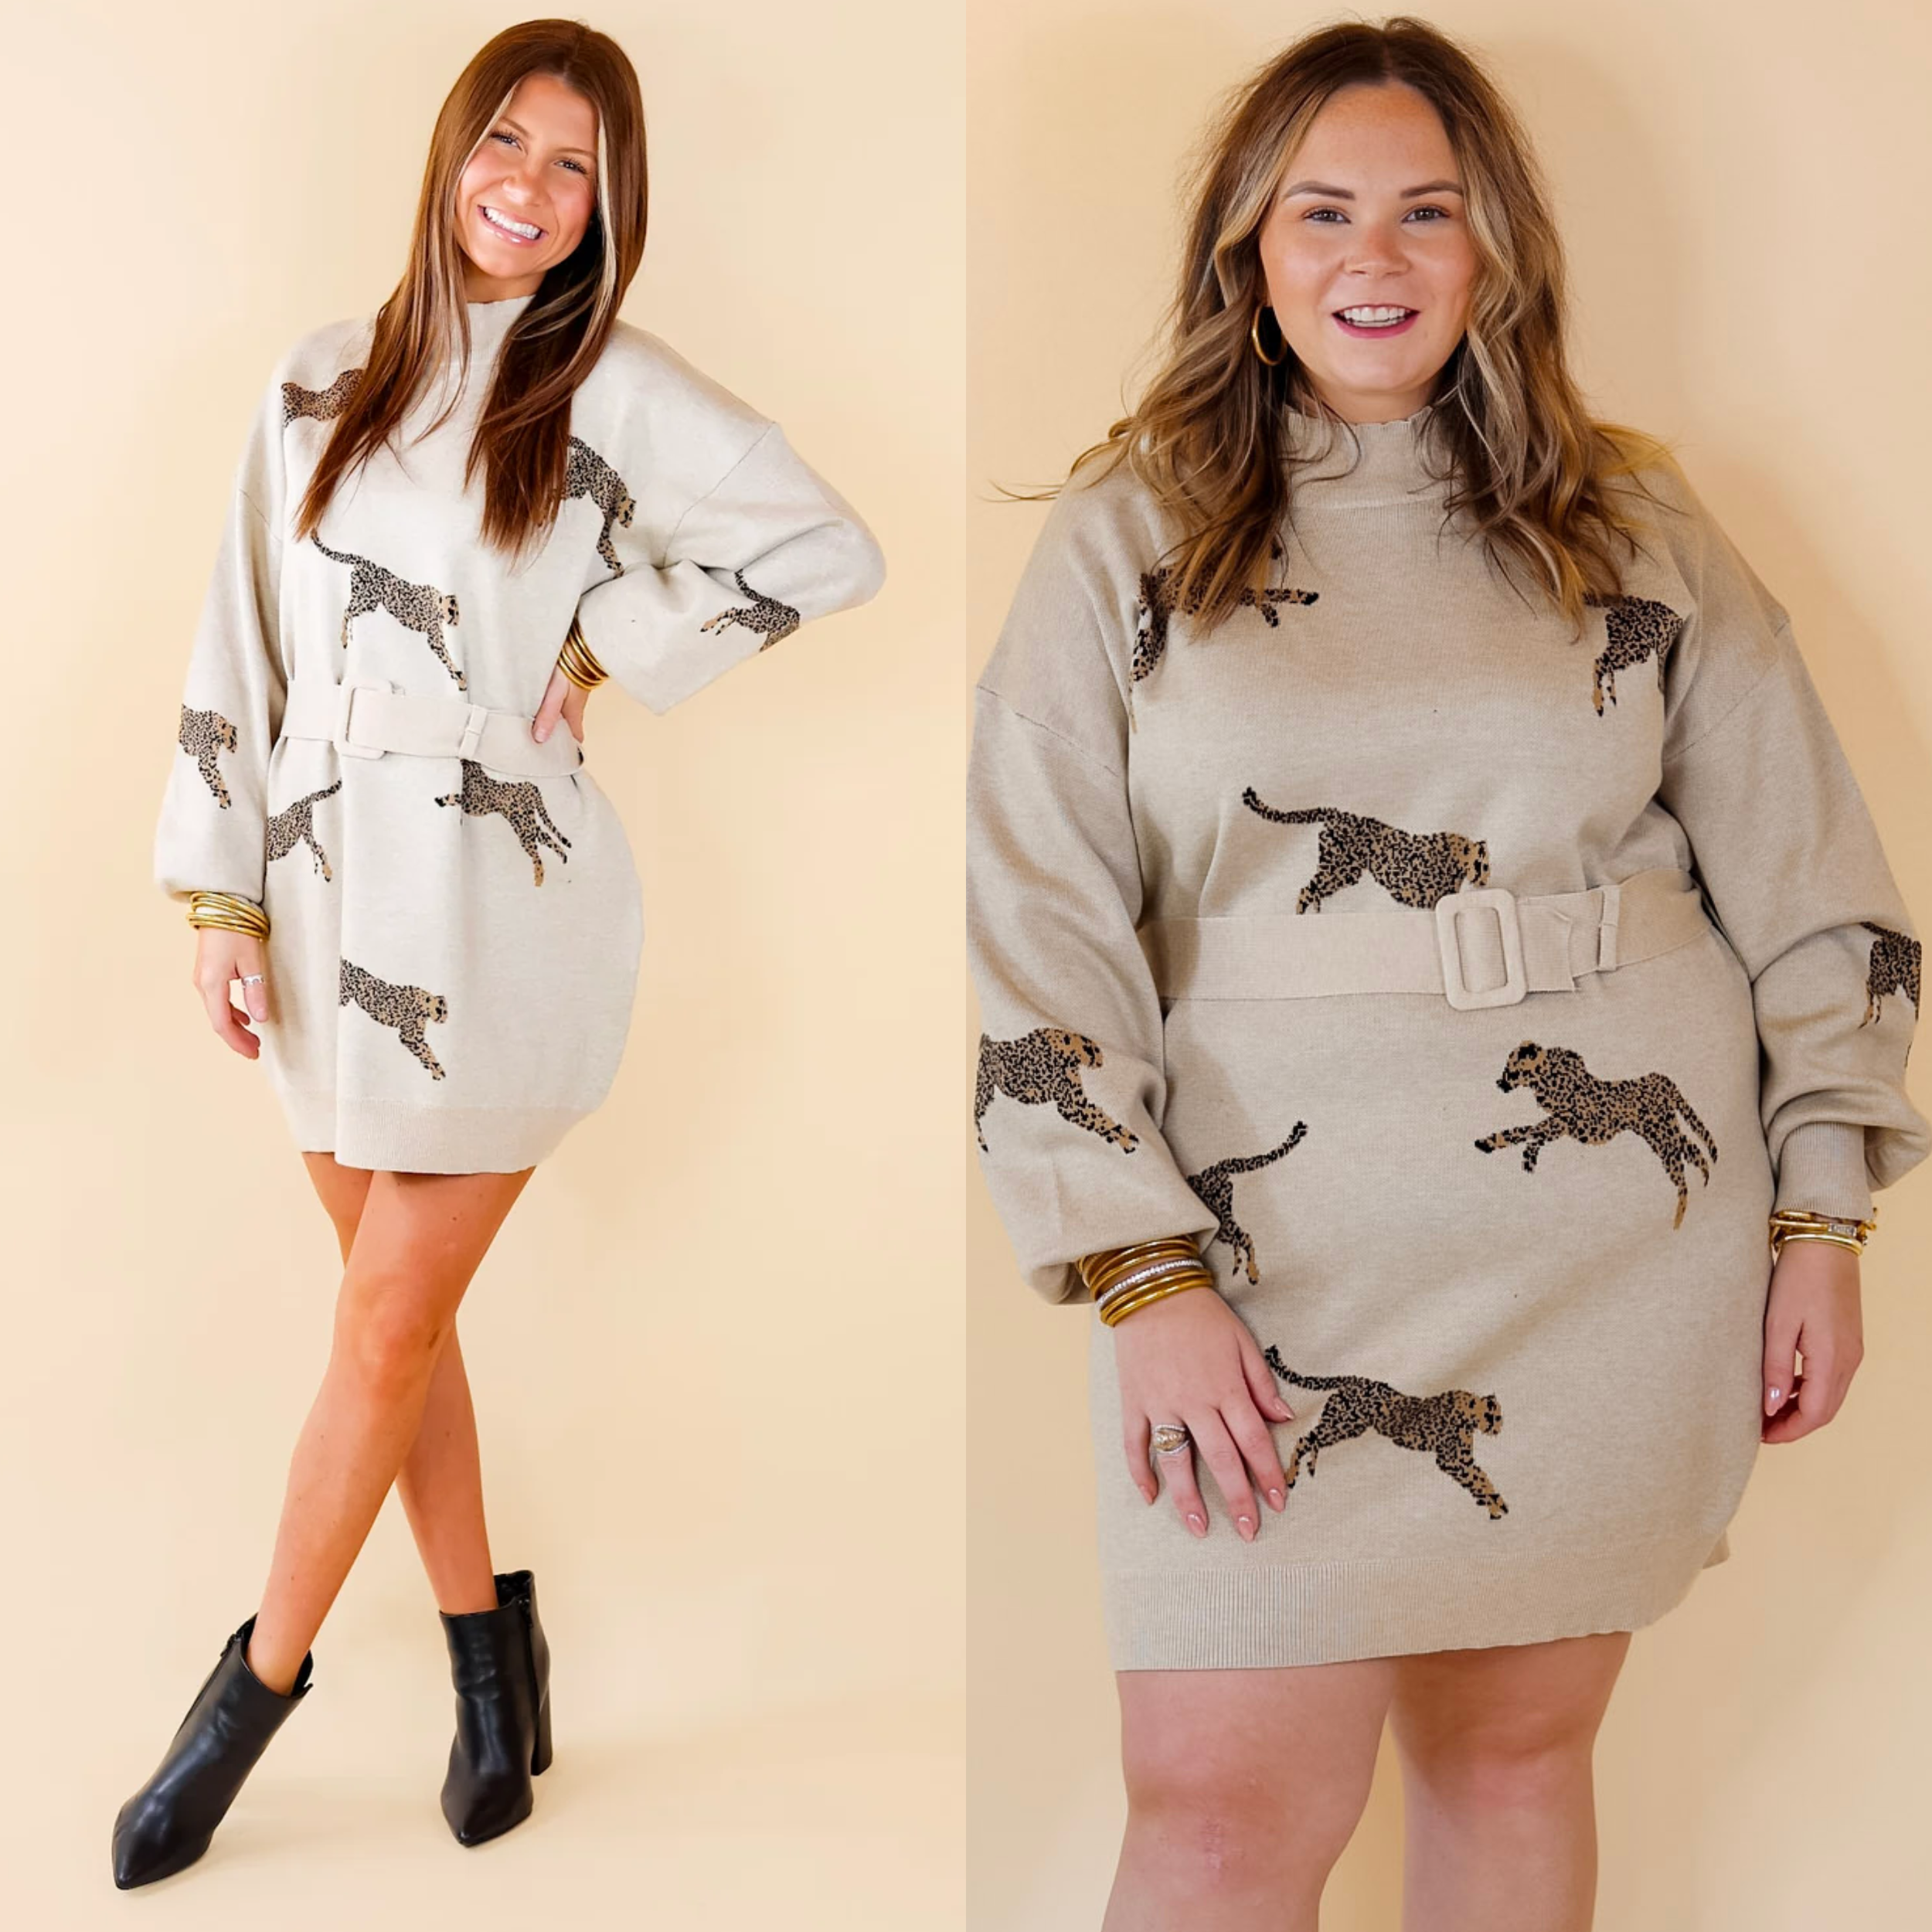 Model is wearing an oatmeal beige sweater dress and belt with leopards printed on it. Model has paired the dress with black booties and gold tone jewelry